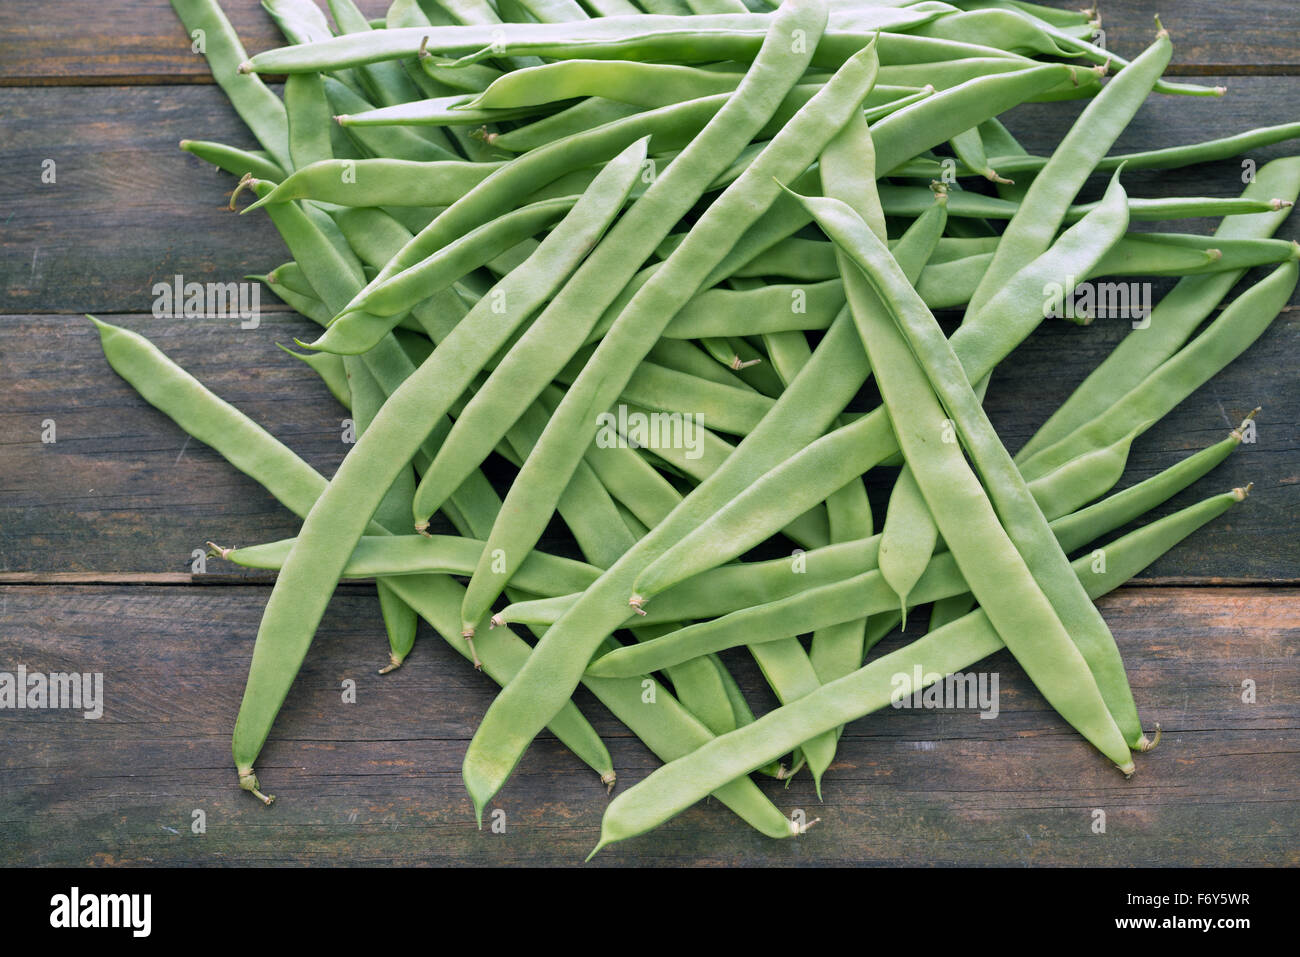 Green beans close up Stock Photo - Alamy